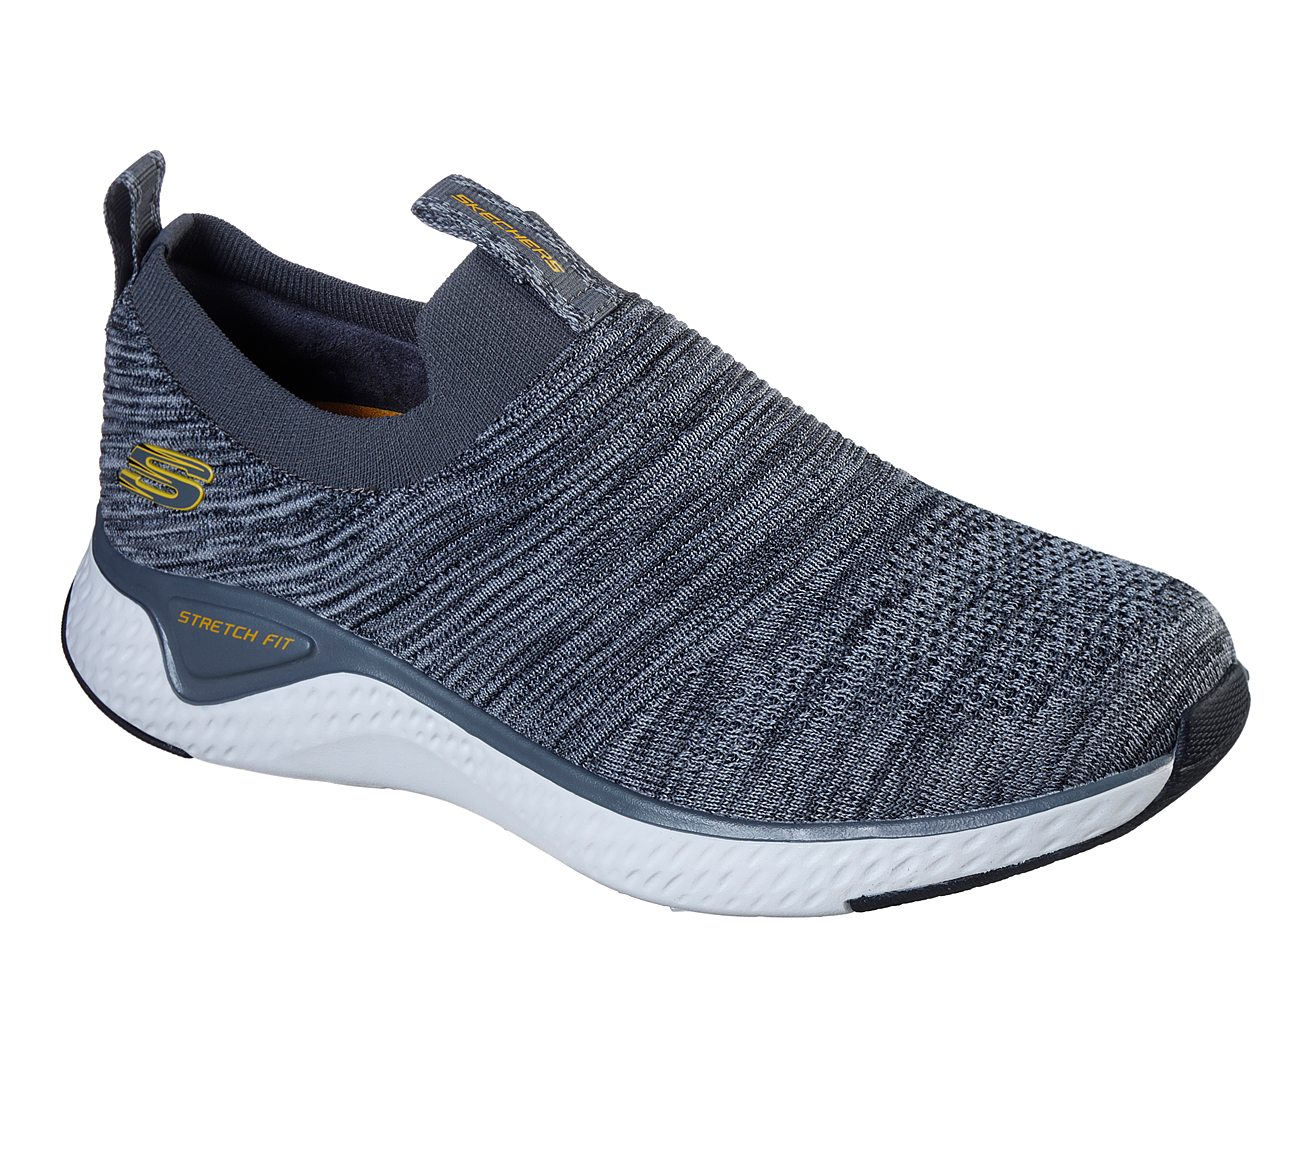 SOLAR FUSE, CHARCOAL/GREY Footwear Lateral View